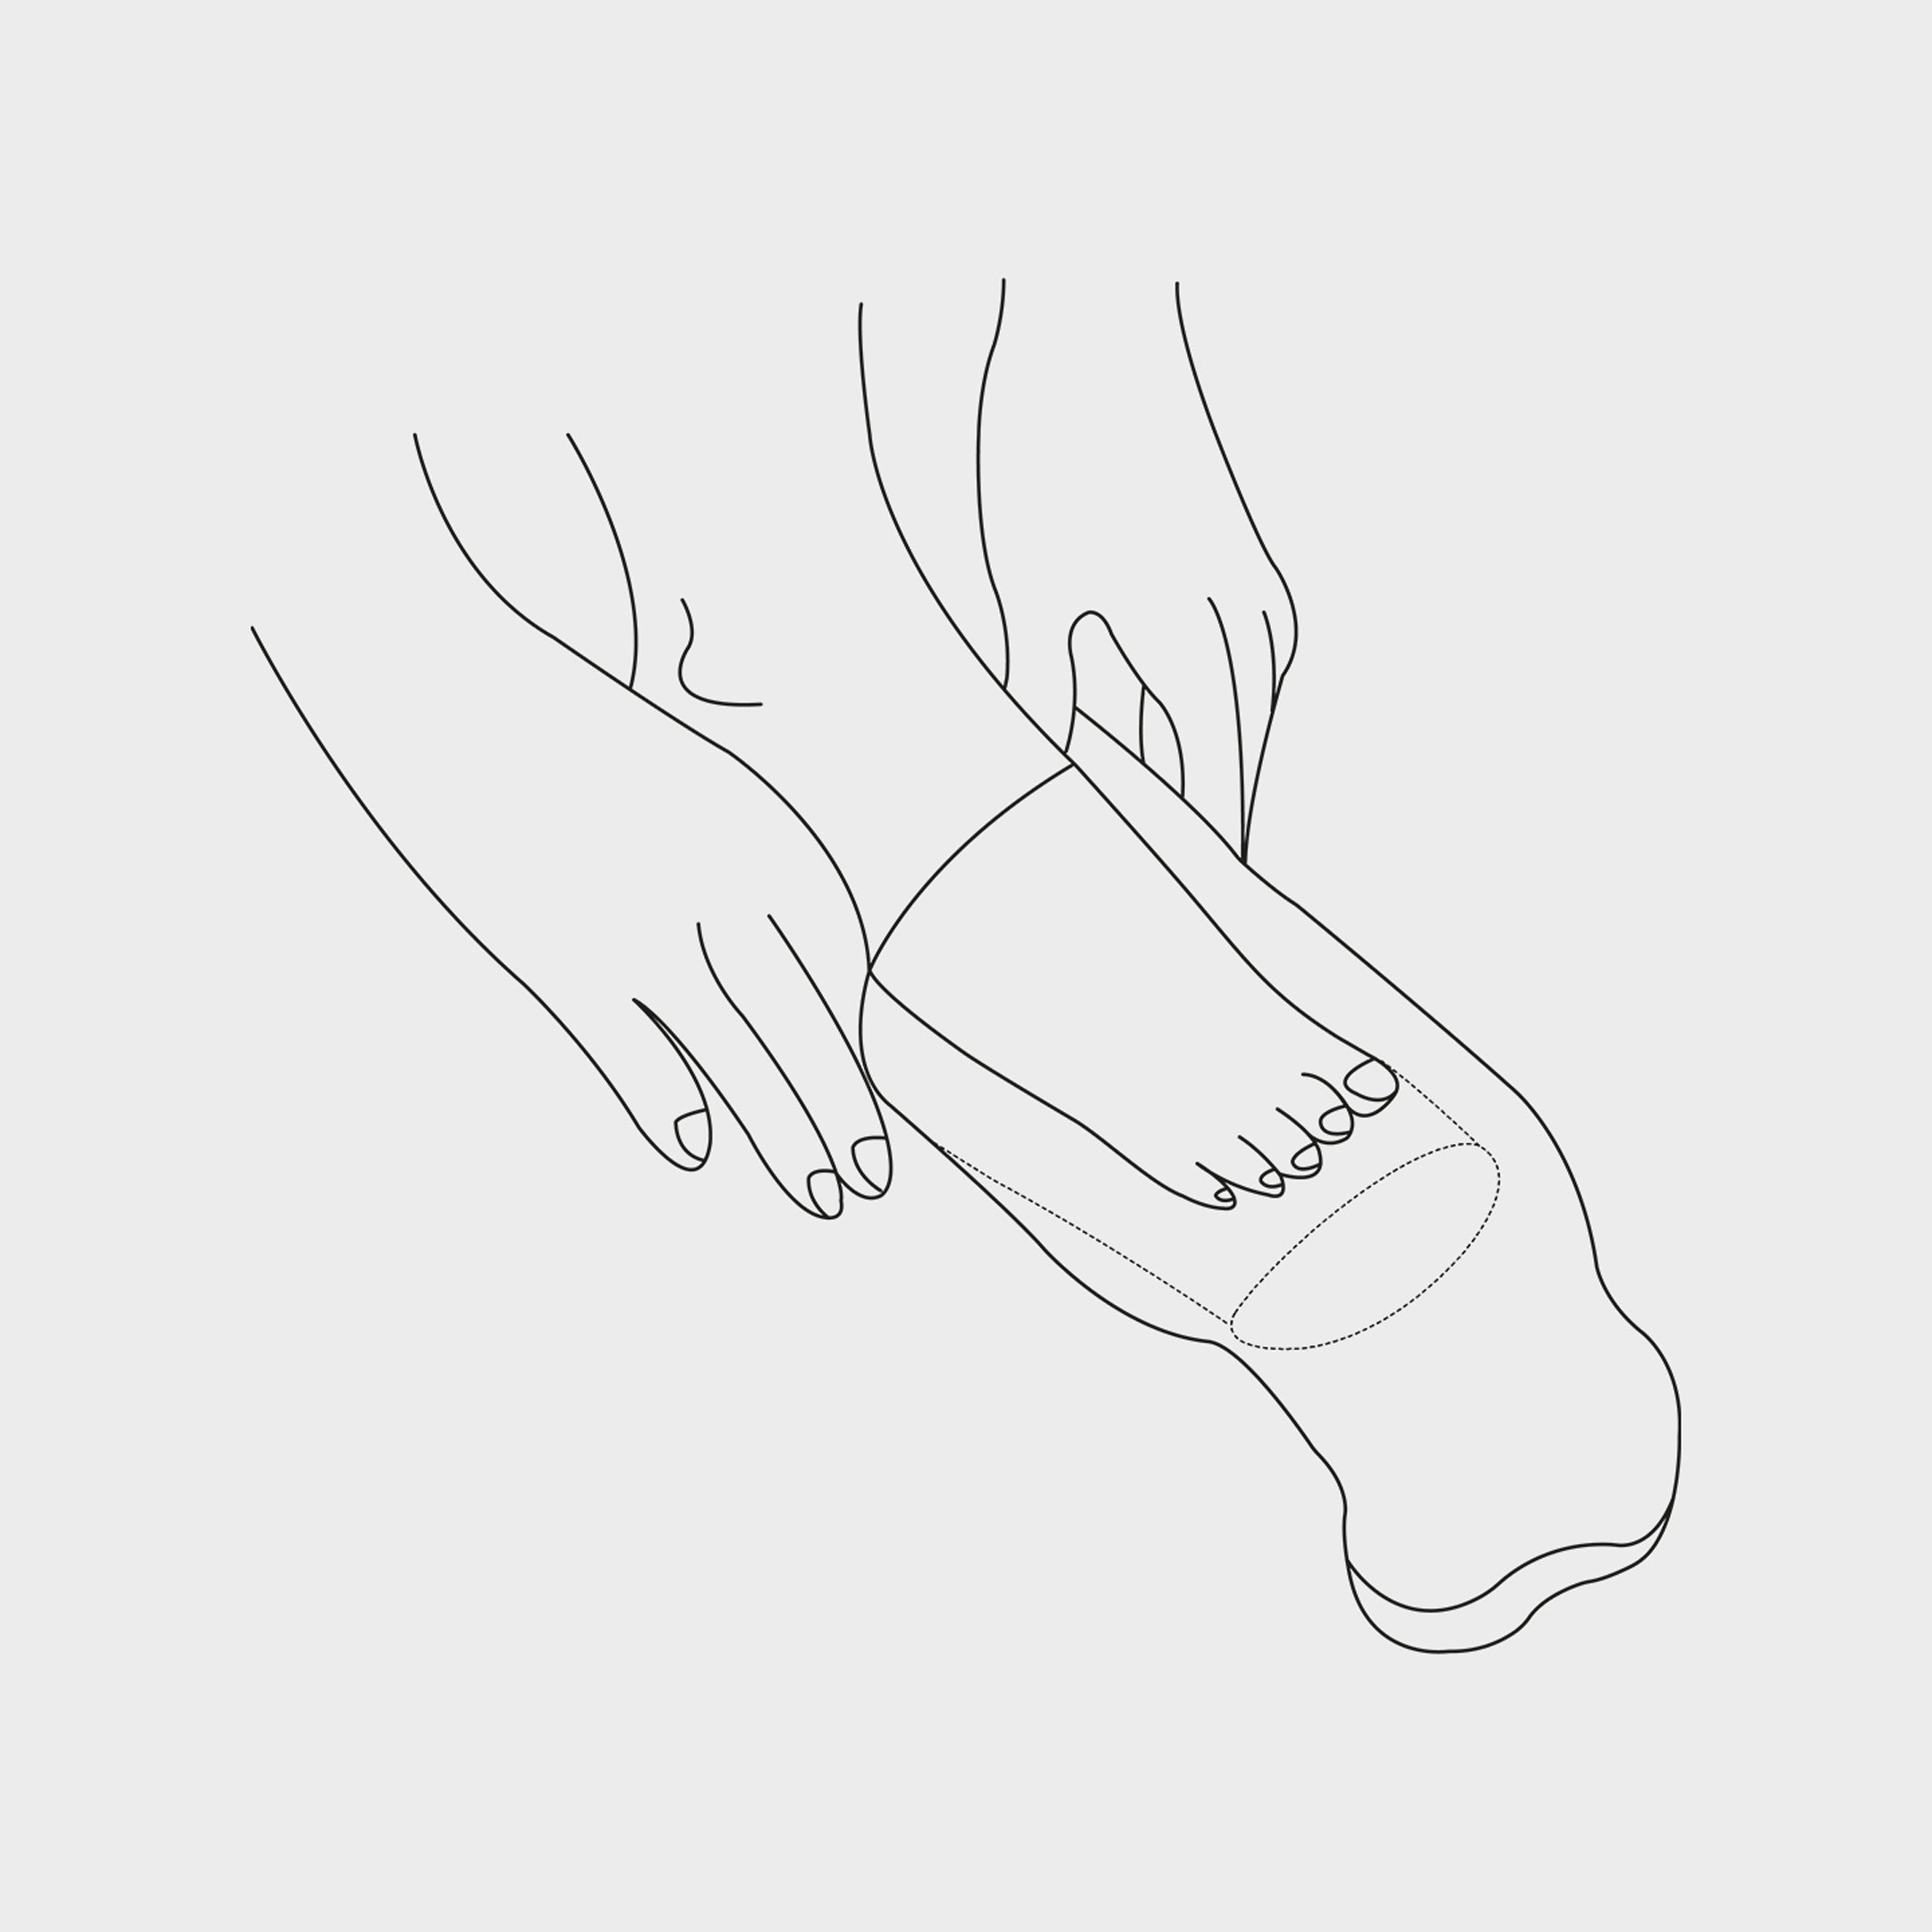 Technical drawing of a foot being placed in a sock with hands.